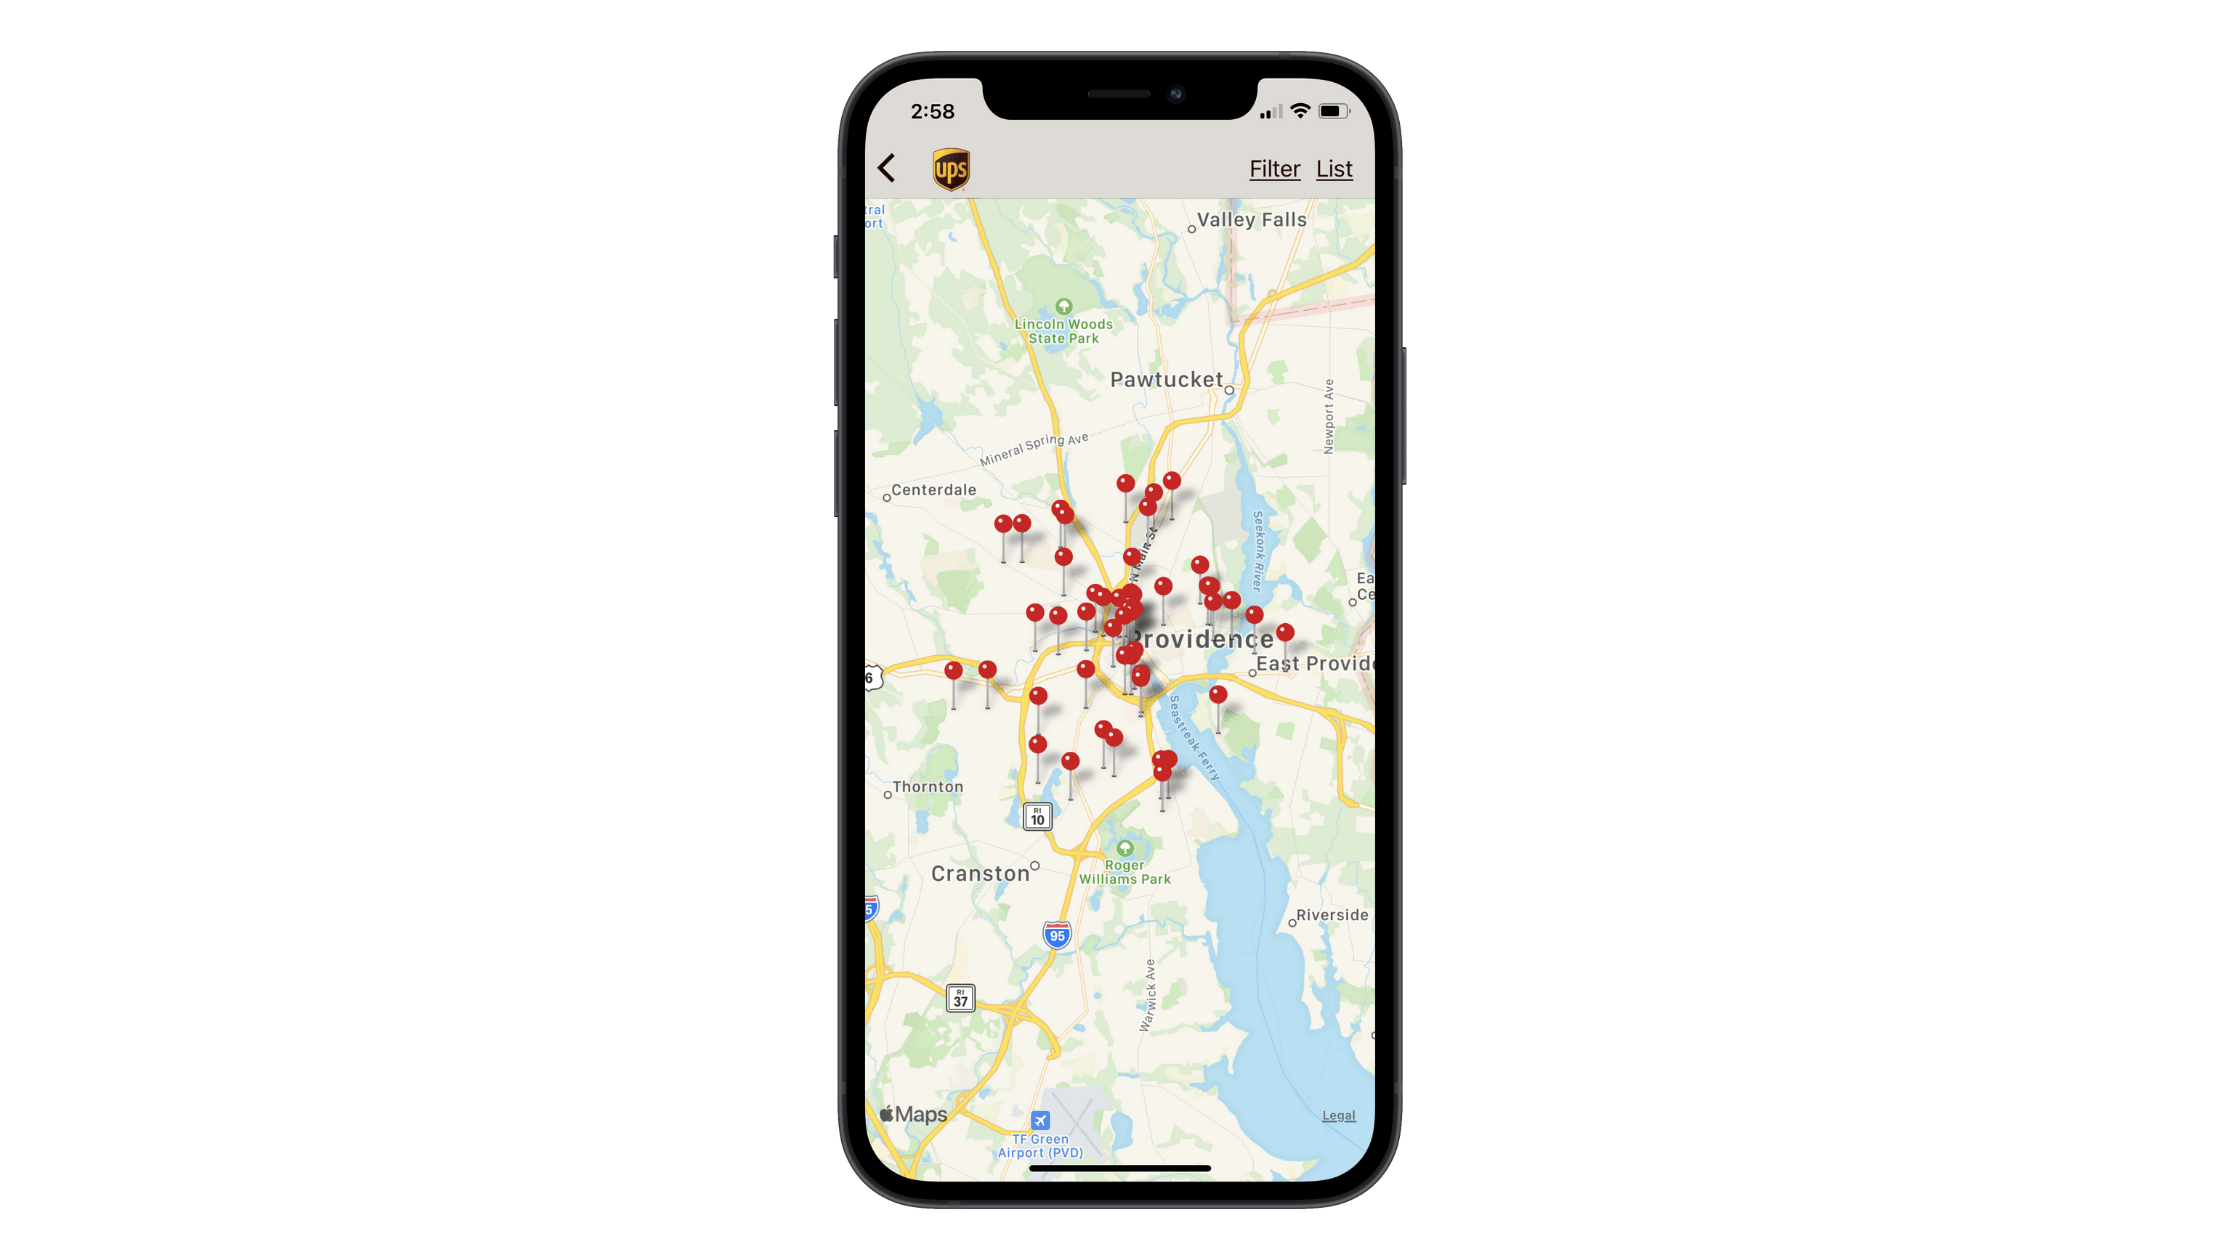 UPS mobile app provides users with the option to search for locations by map. This map shows dozens of red pins in and around the city of Providence, RI.